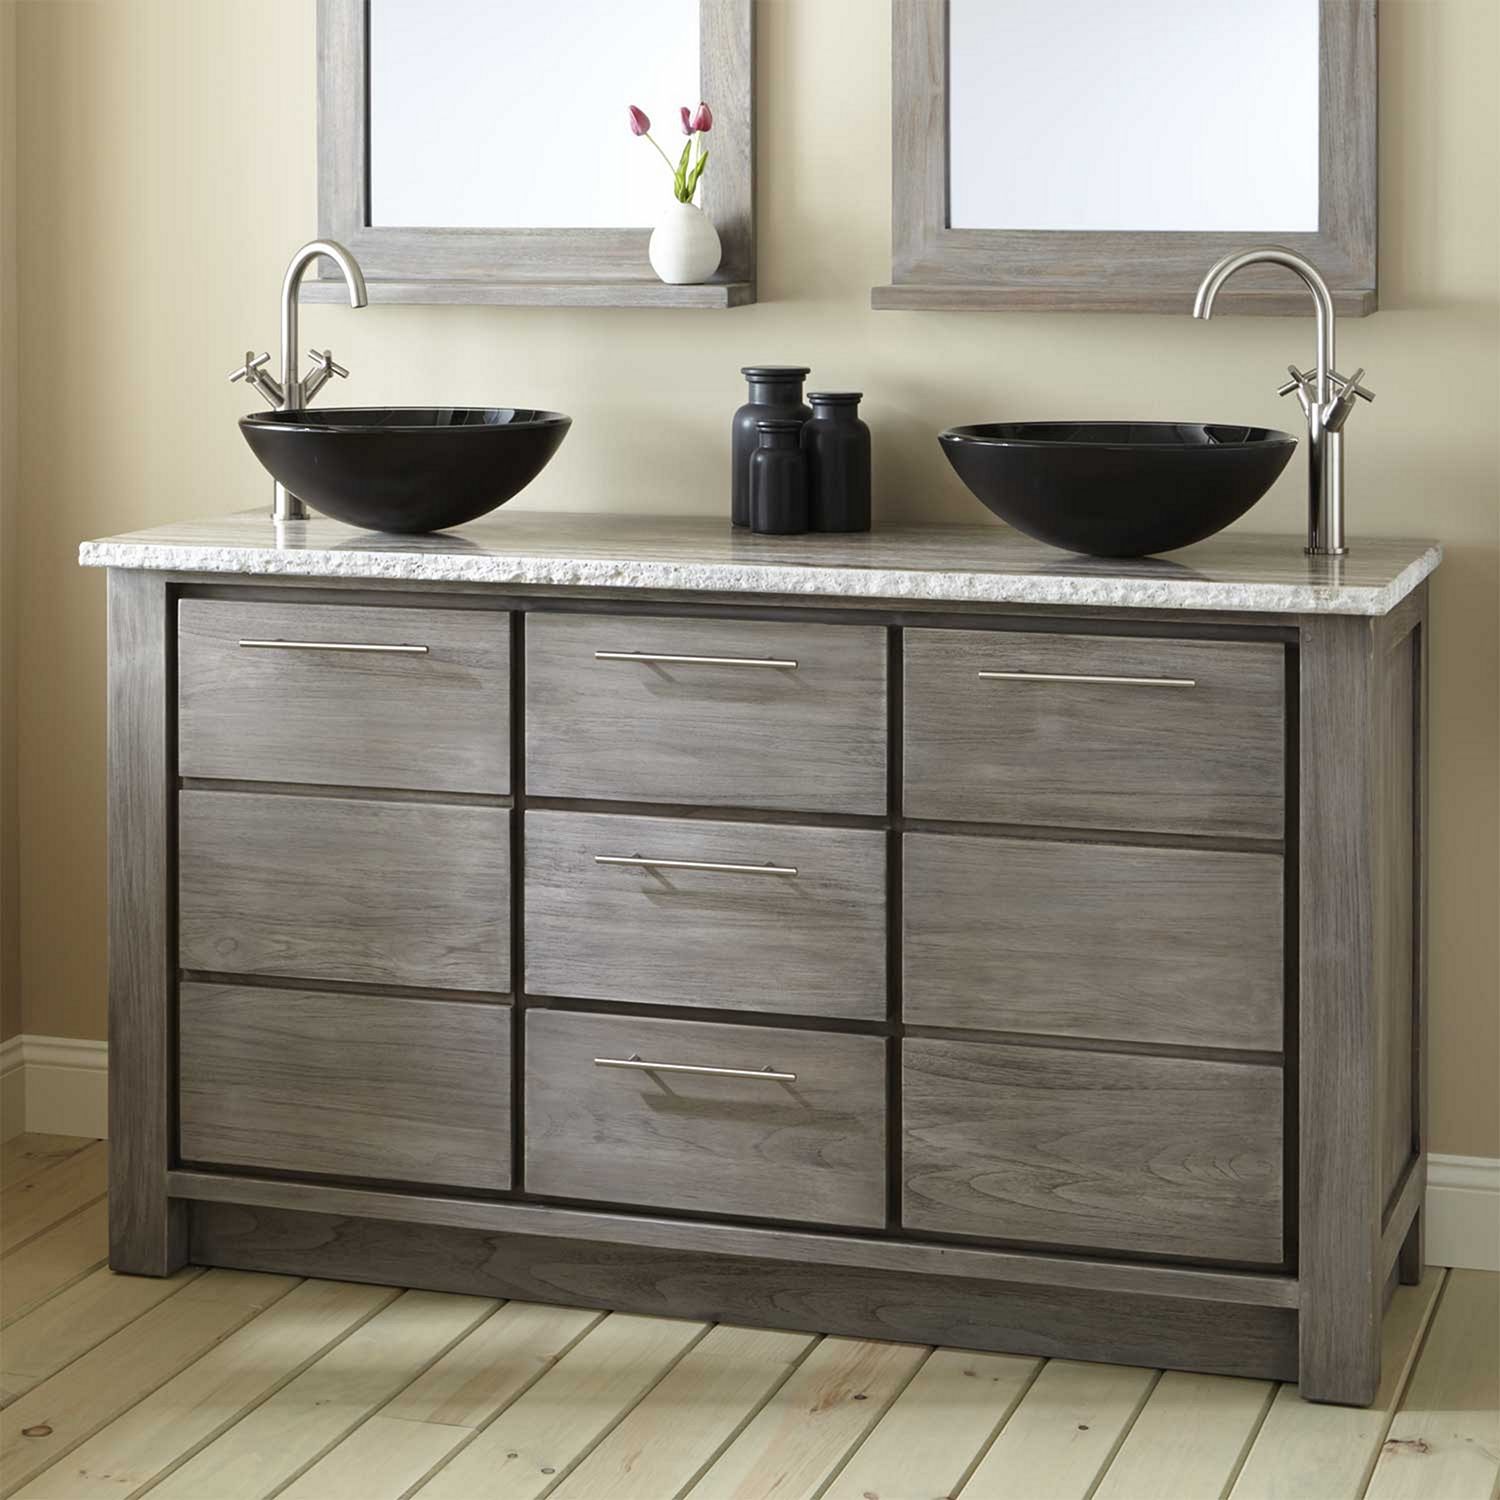 IKEA Bathroom Vanities 30 (IKEA Bathroom Vanities 30) design ideas and ...